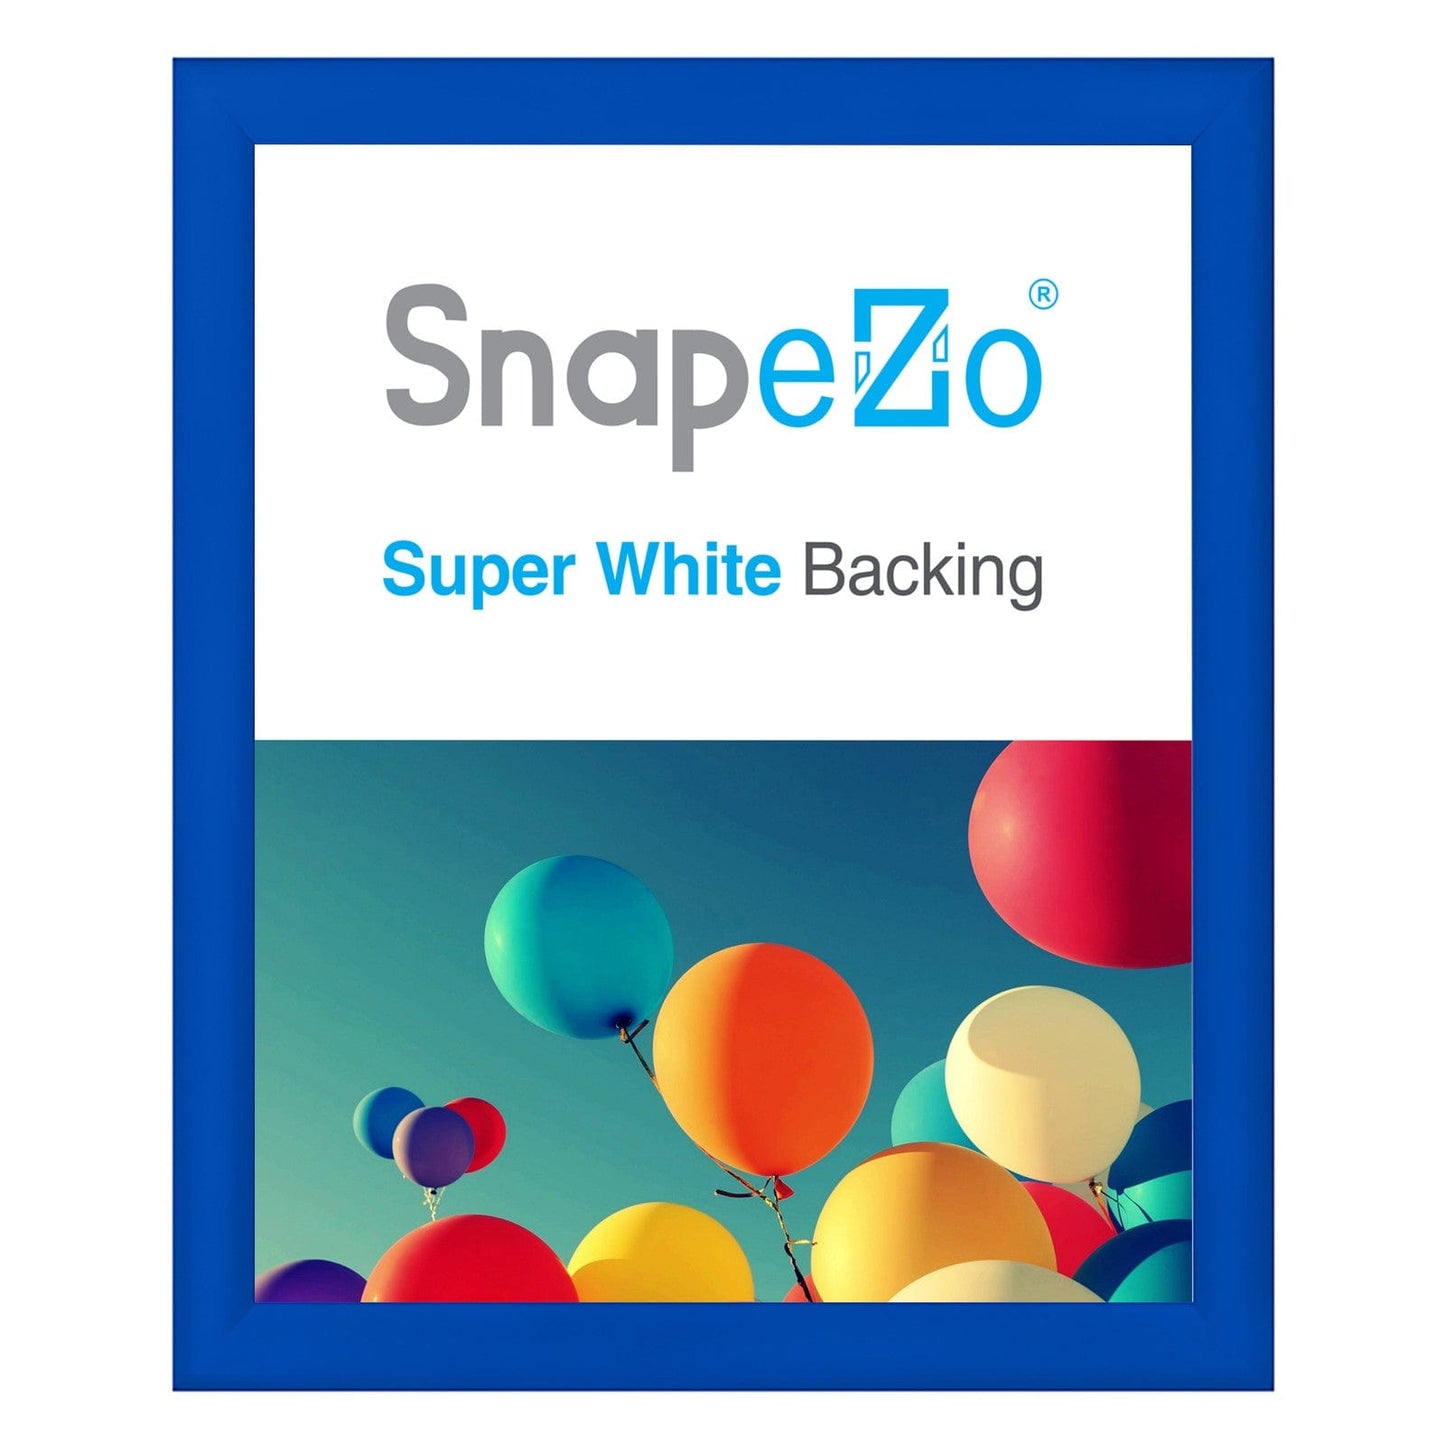 29x36 Blue SnapeZo® Snap Frame - 1.2" Profile - Snap Frames Direct